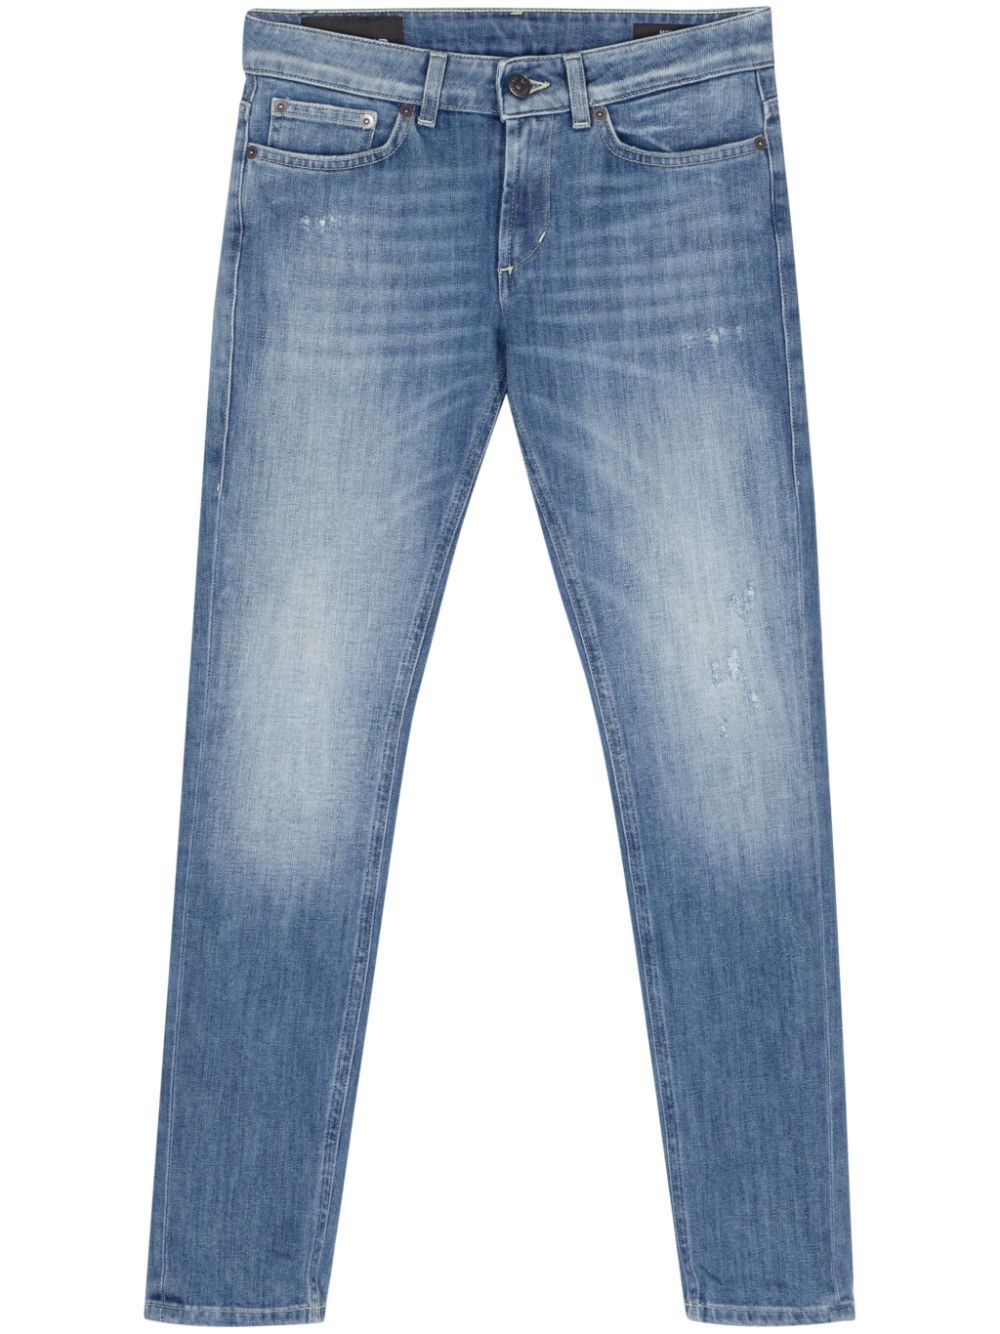 Aged effect jeans